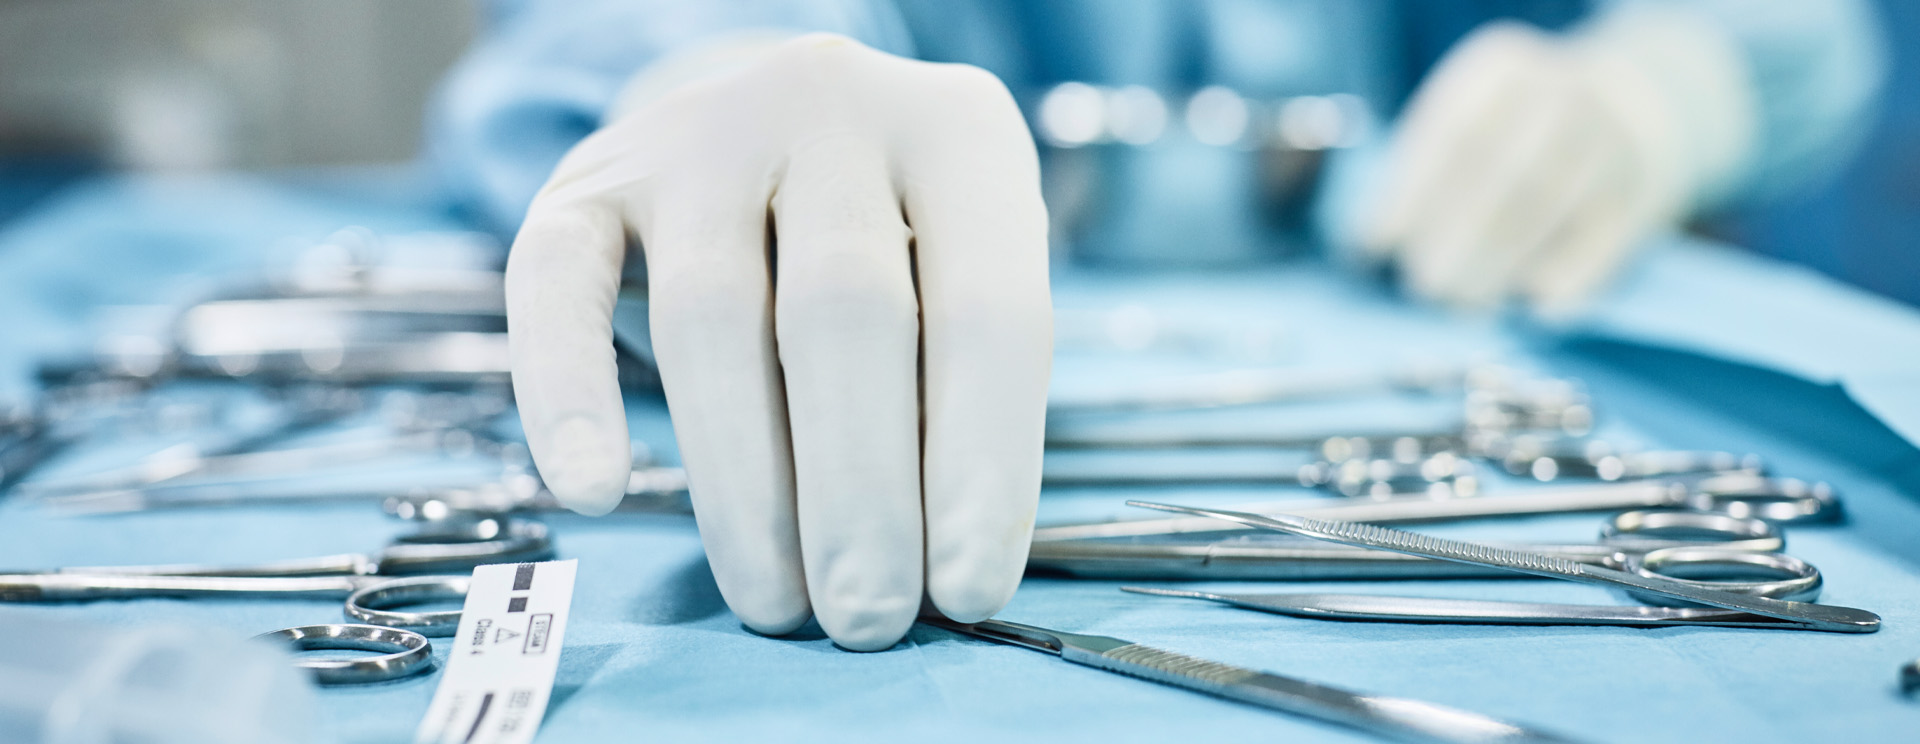 Maximizing the Lifespan of Surgical Instruments